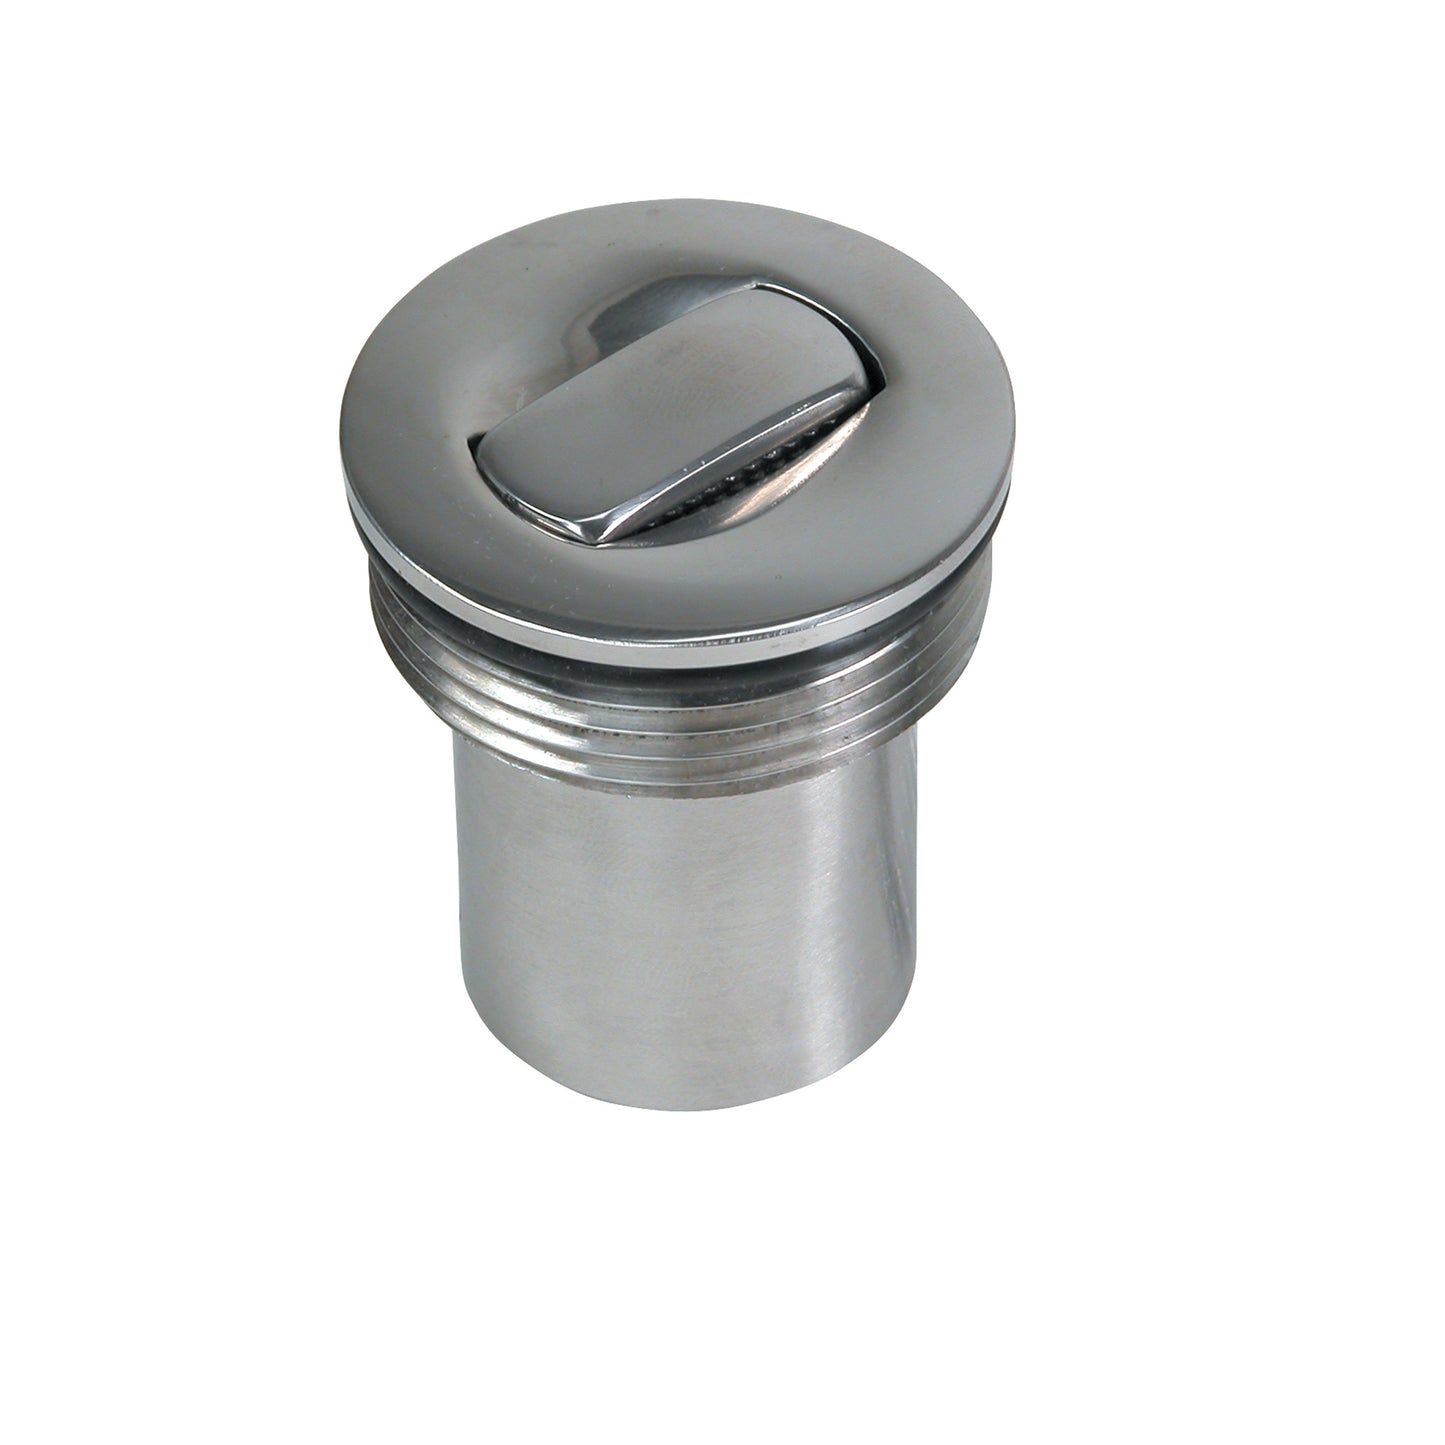 1-1/2" Universal Push Up Deck Fill Replacement Cap